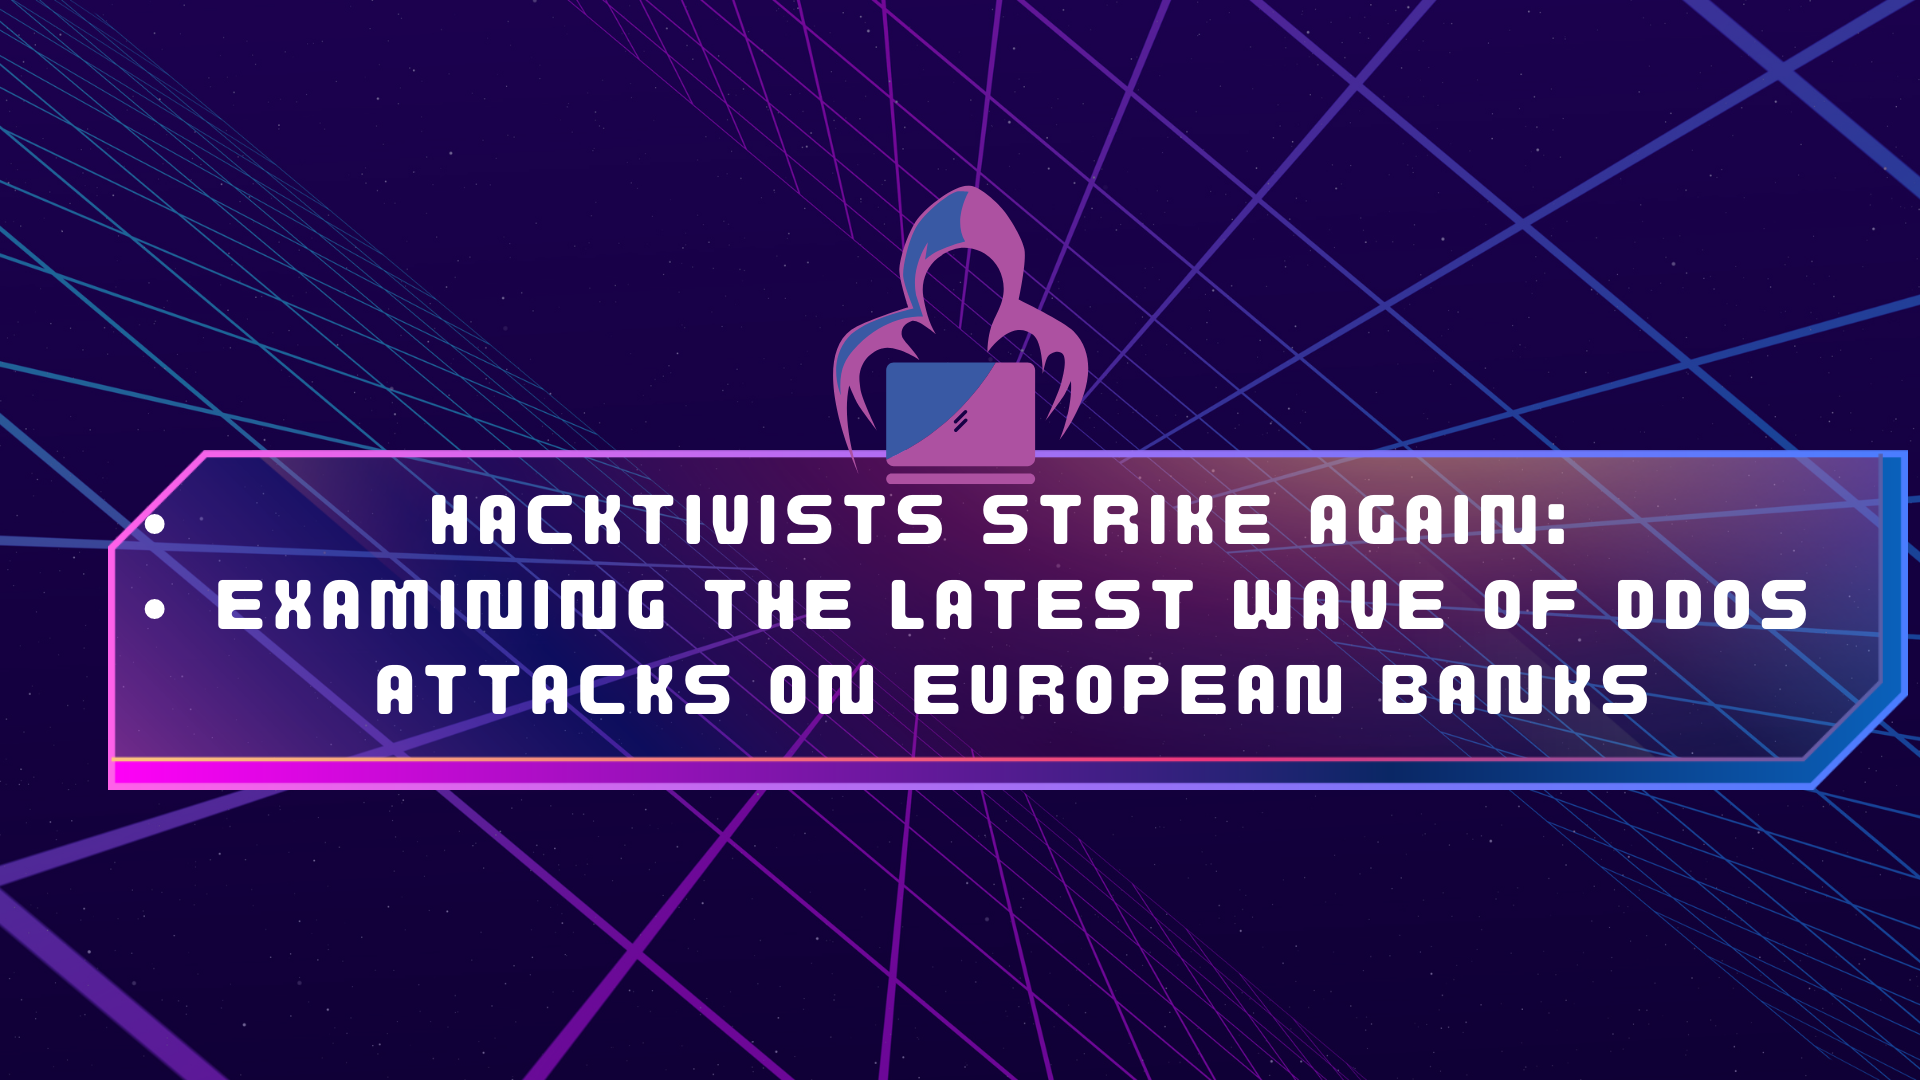 Hacktivists Strike Again Examining the Latest Wave of DDoS Attacks on European Banks